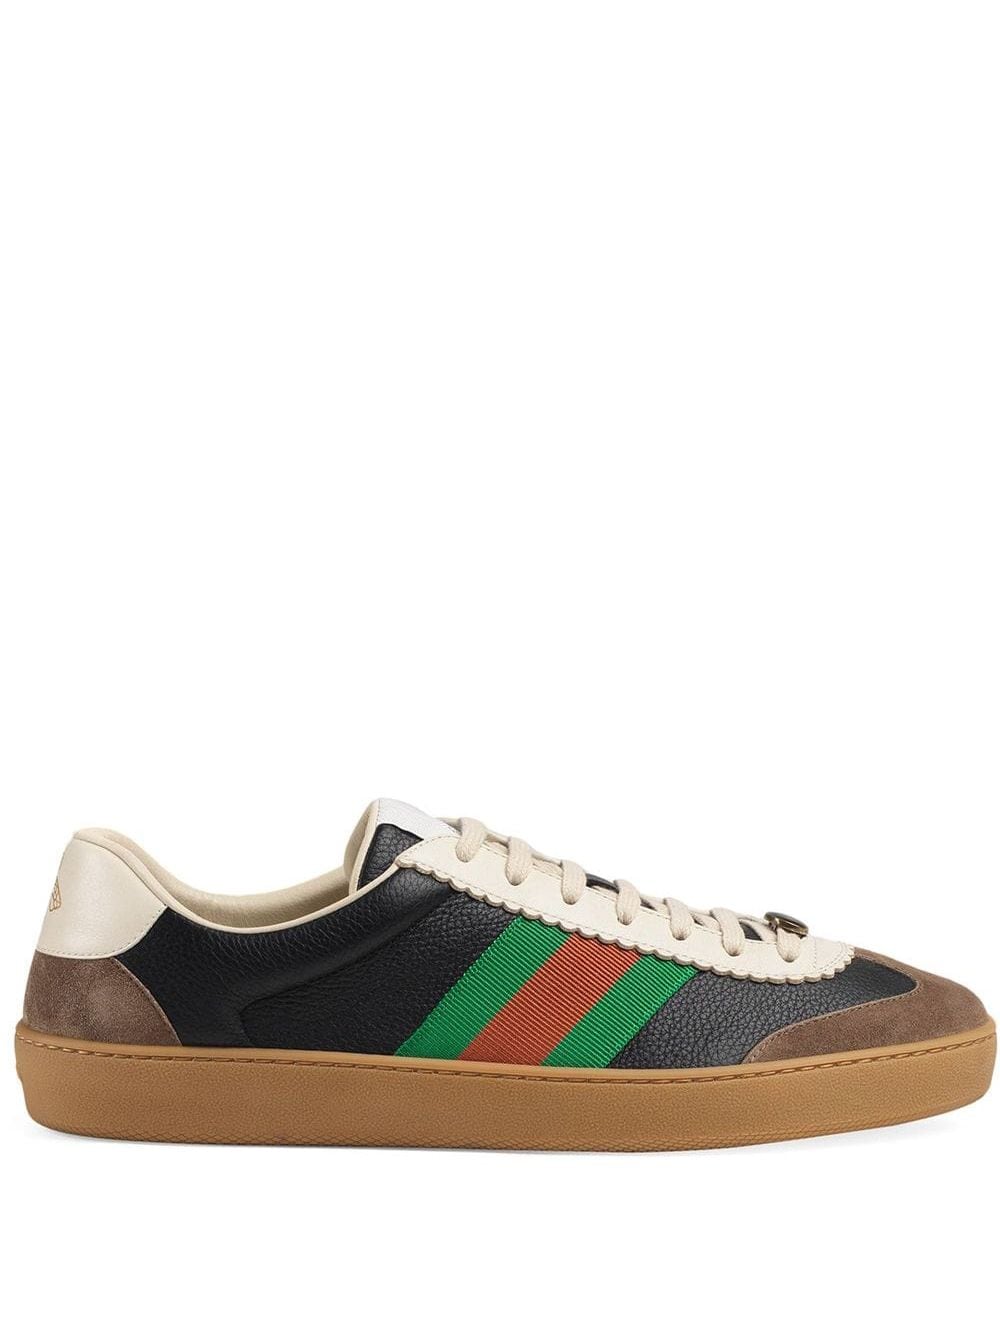 Gucci Leather And Suede Web Sneakers - Farfetch